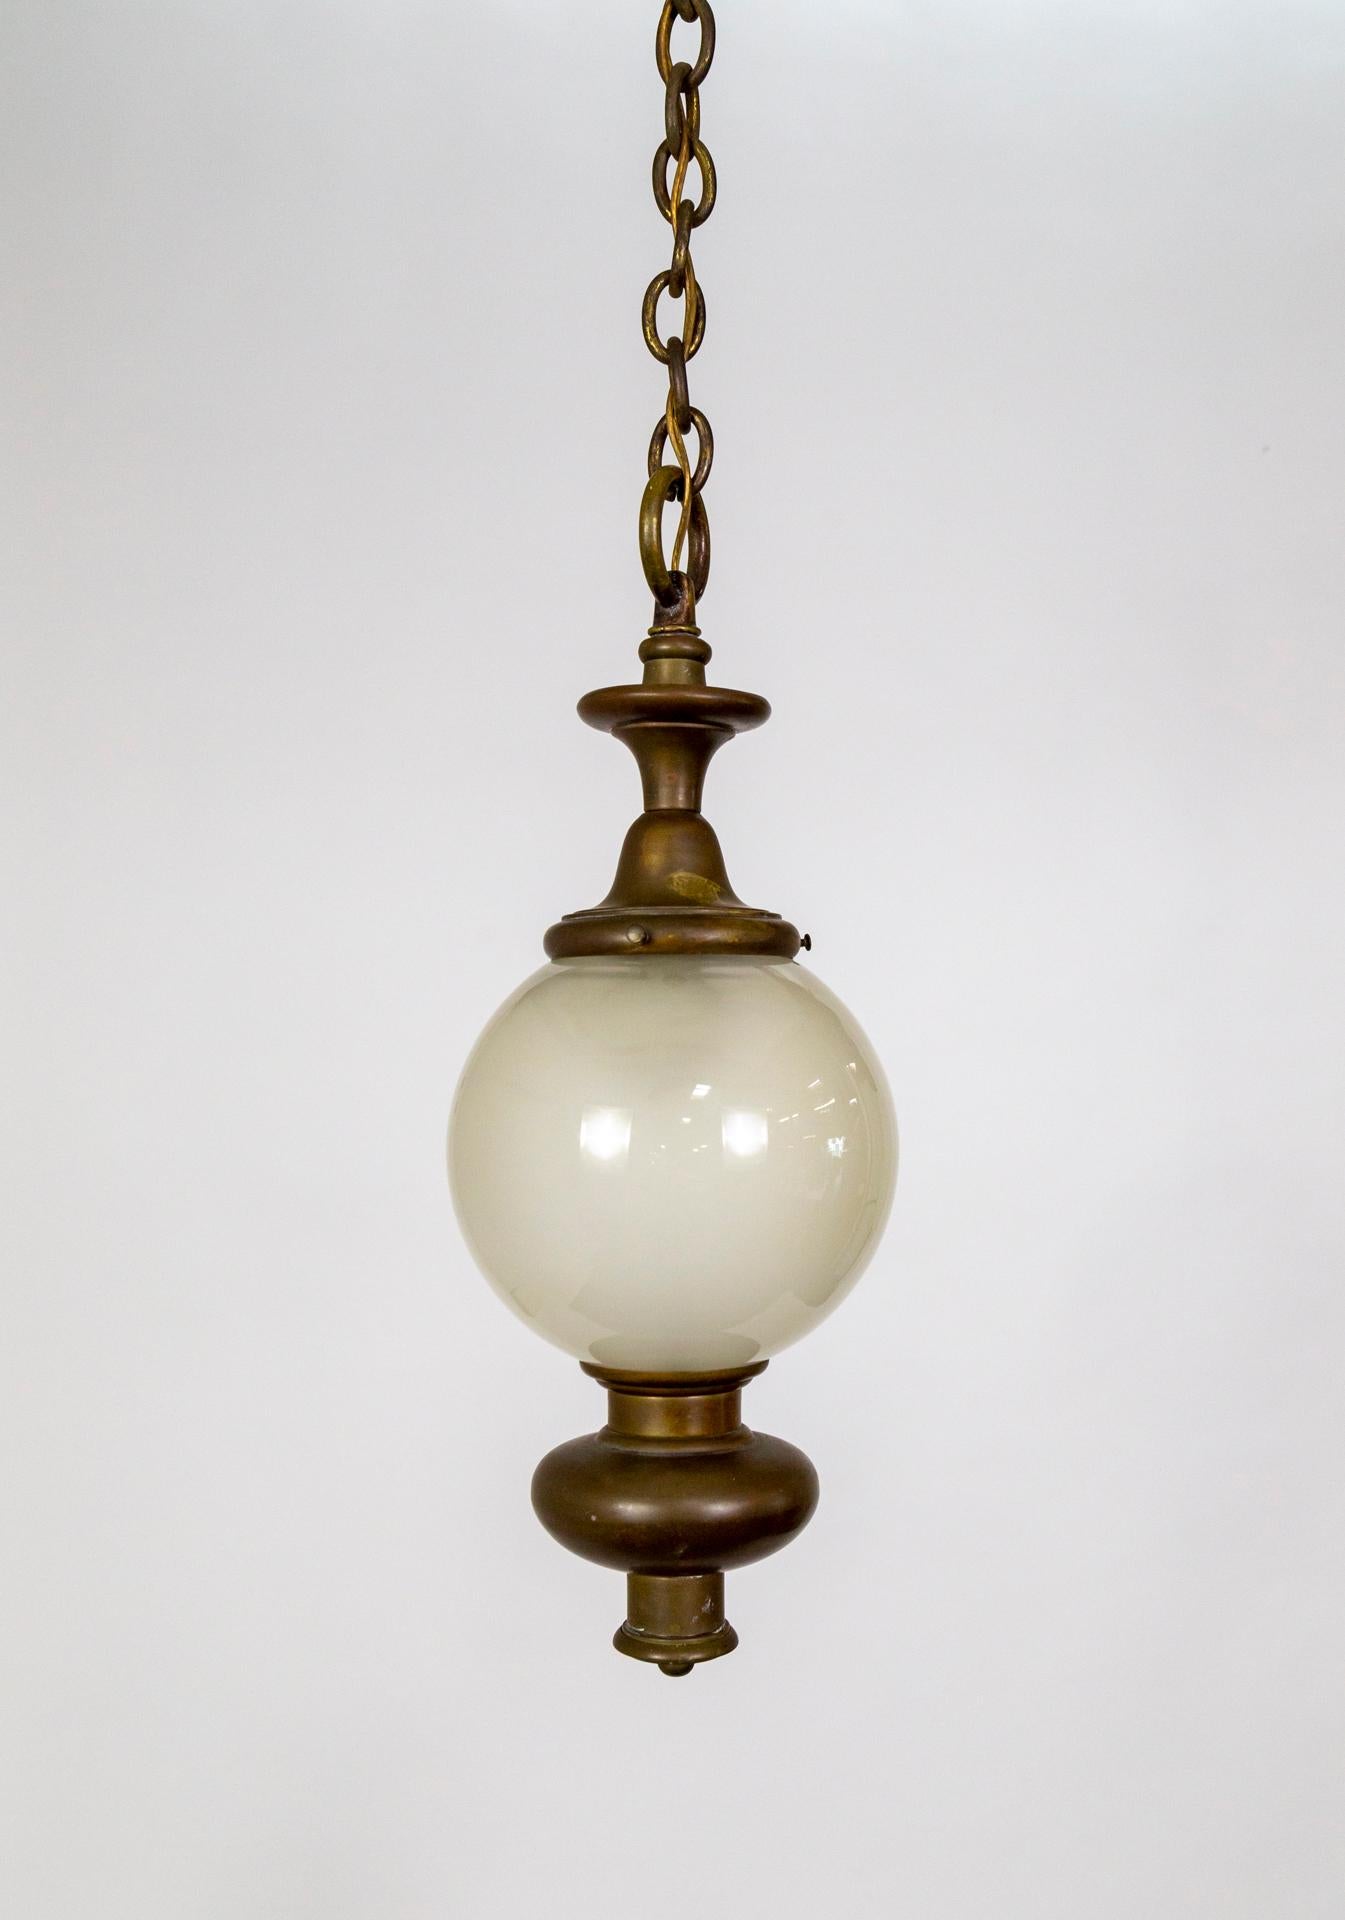 Antique Hanging Lantern w/ Frosted Globe Shade 5